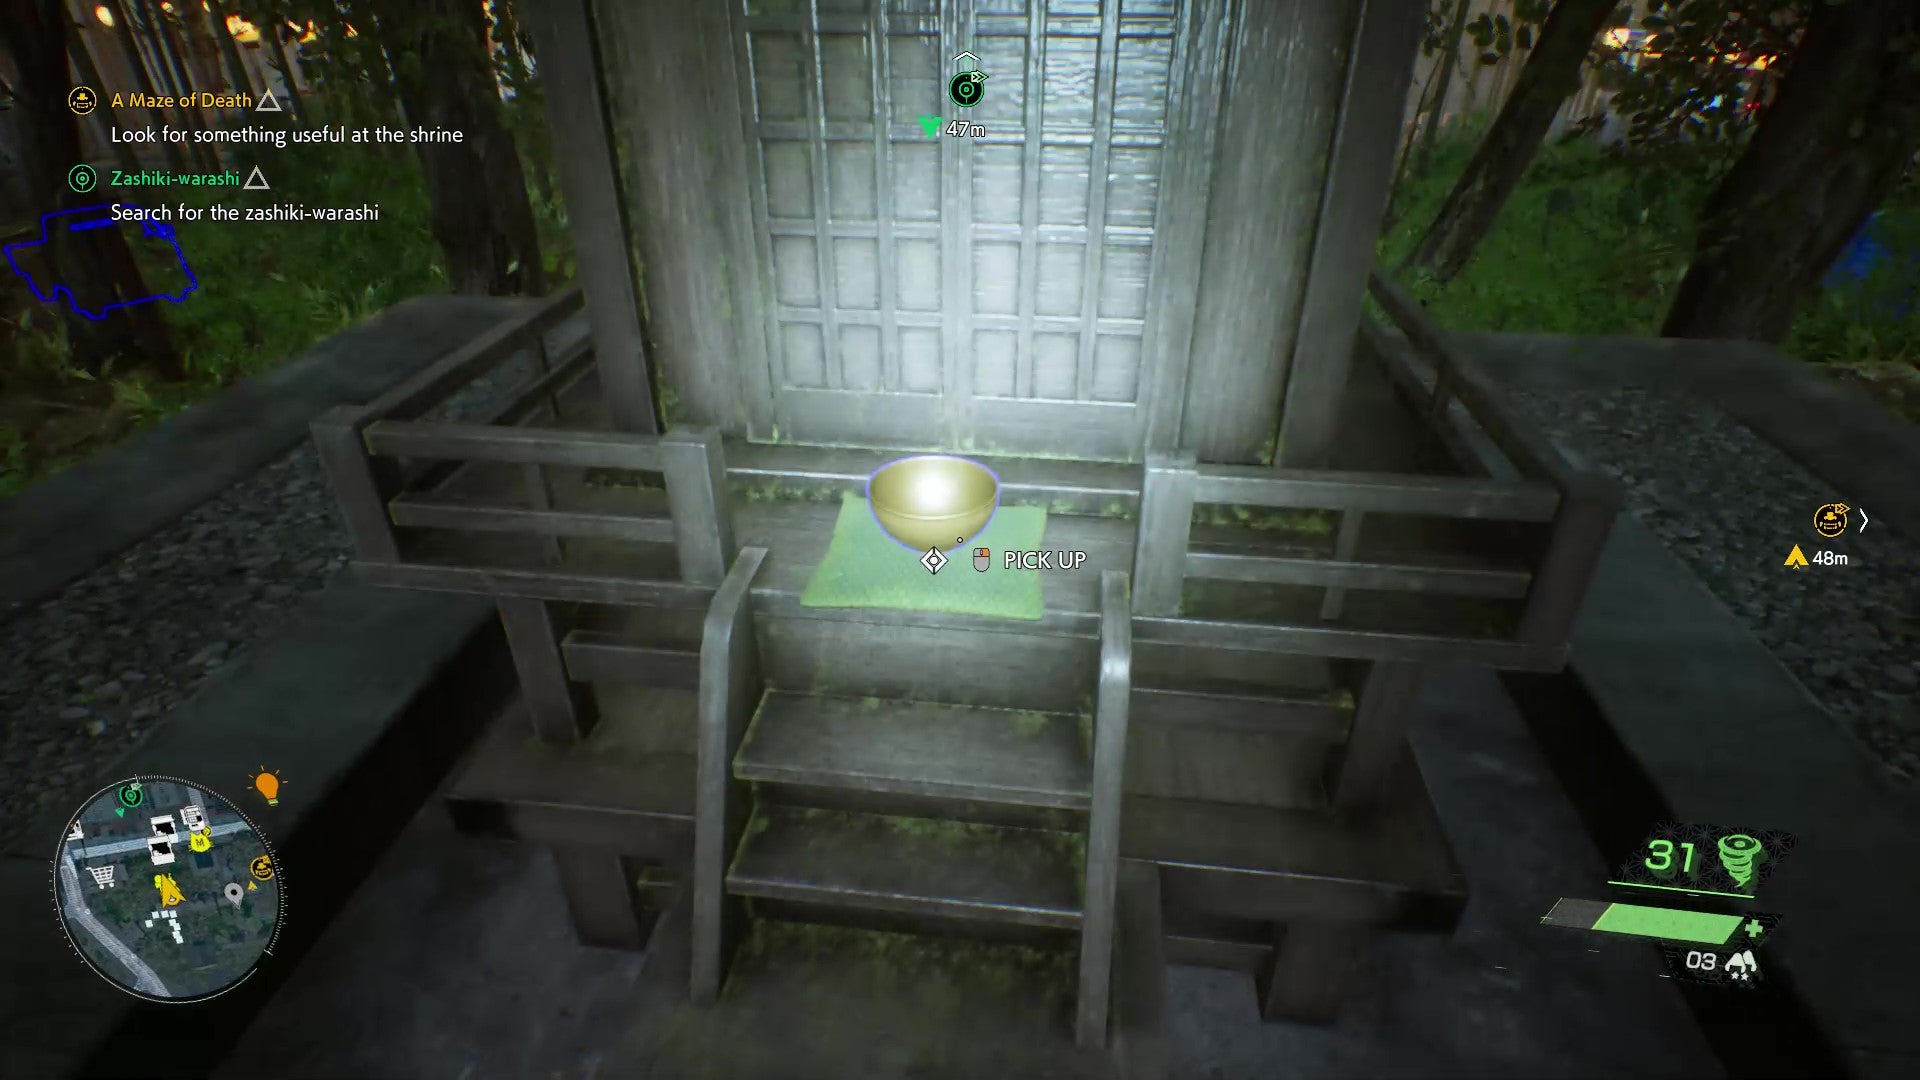 A screenshot showing the location of the Golden Tea Bowl relic in Ghostwire: Tokyo.